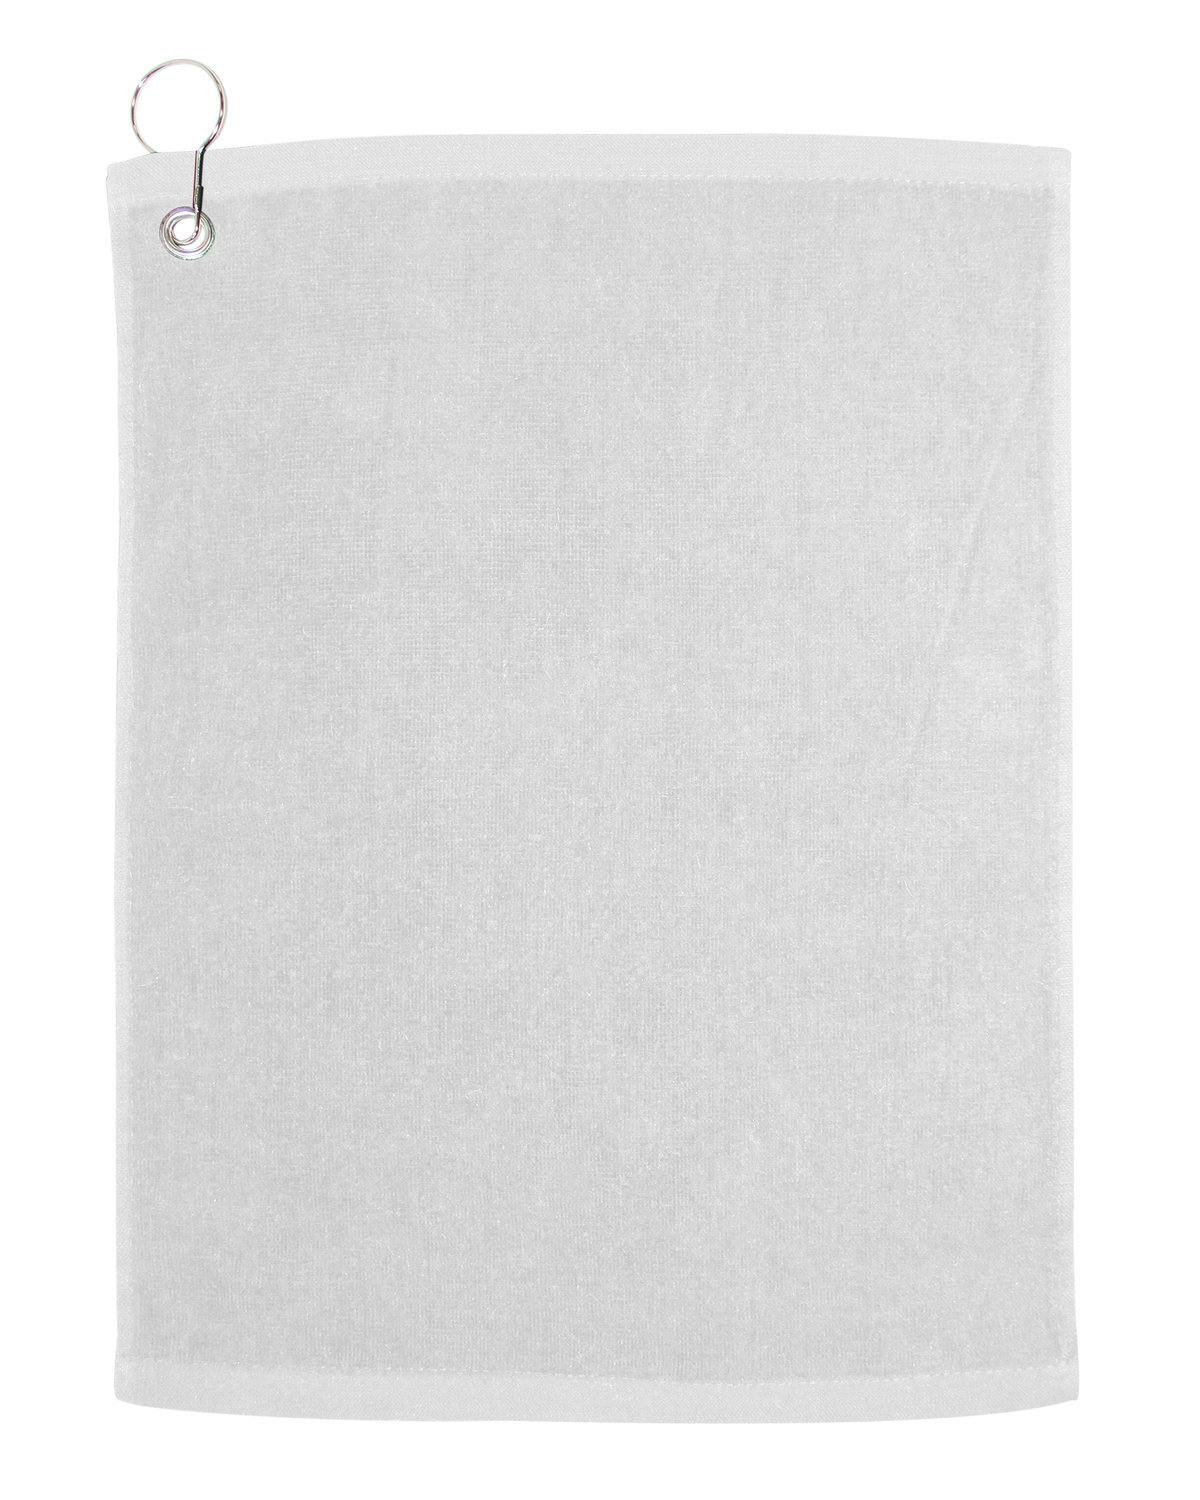 Image for Large Rally Towel with Grommet and Hook